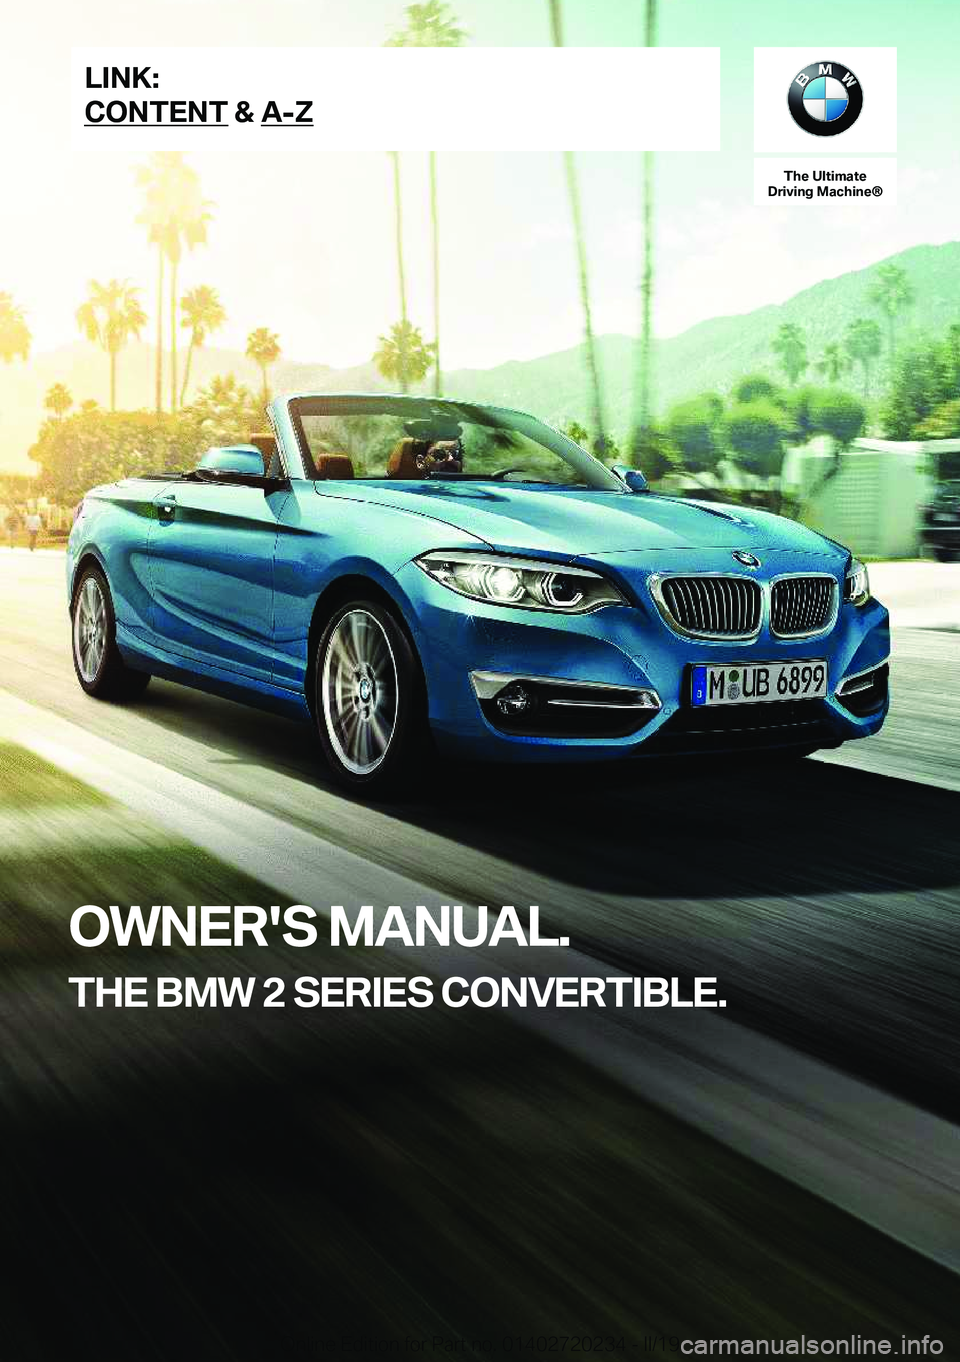 BMW 2 SERIES CONVERTIBLE 2020  Owners Manual �T�h�e��U�l�t�i�m�a�t�e
�D�r�i�v�i�n�g��M�a�c�h�i�n�e�n
�O�W�N�E�R�'�S��M�A�N�U�A�L�.
�T�H�E��B�M�W��2��S�E�R�I�E�S��C�O�N�V�E�R�T�I�B�L�E�.�L�I�N�K�:
�C�O�N�T�E�N�T��&��A�-�Z�O�n�l�i�n�e